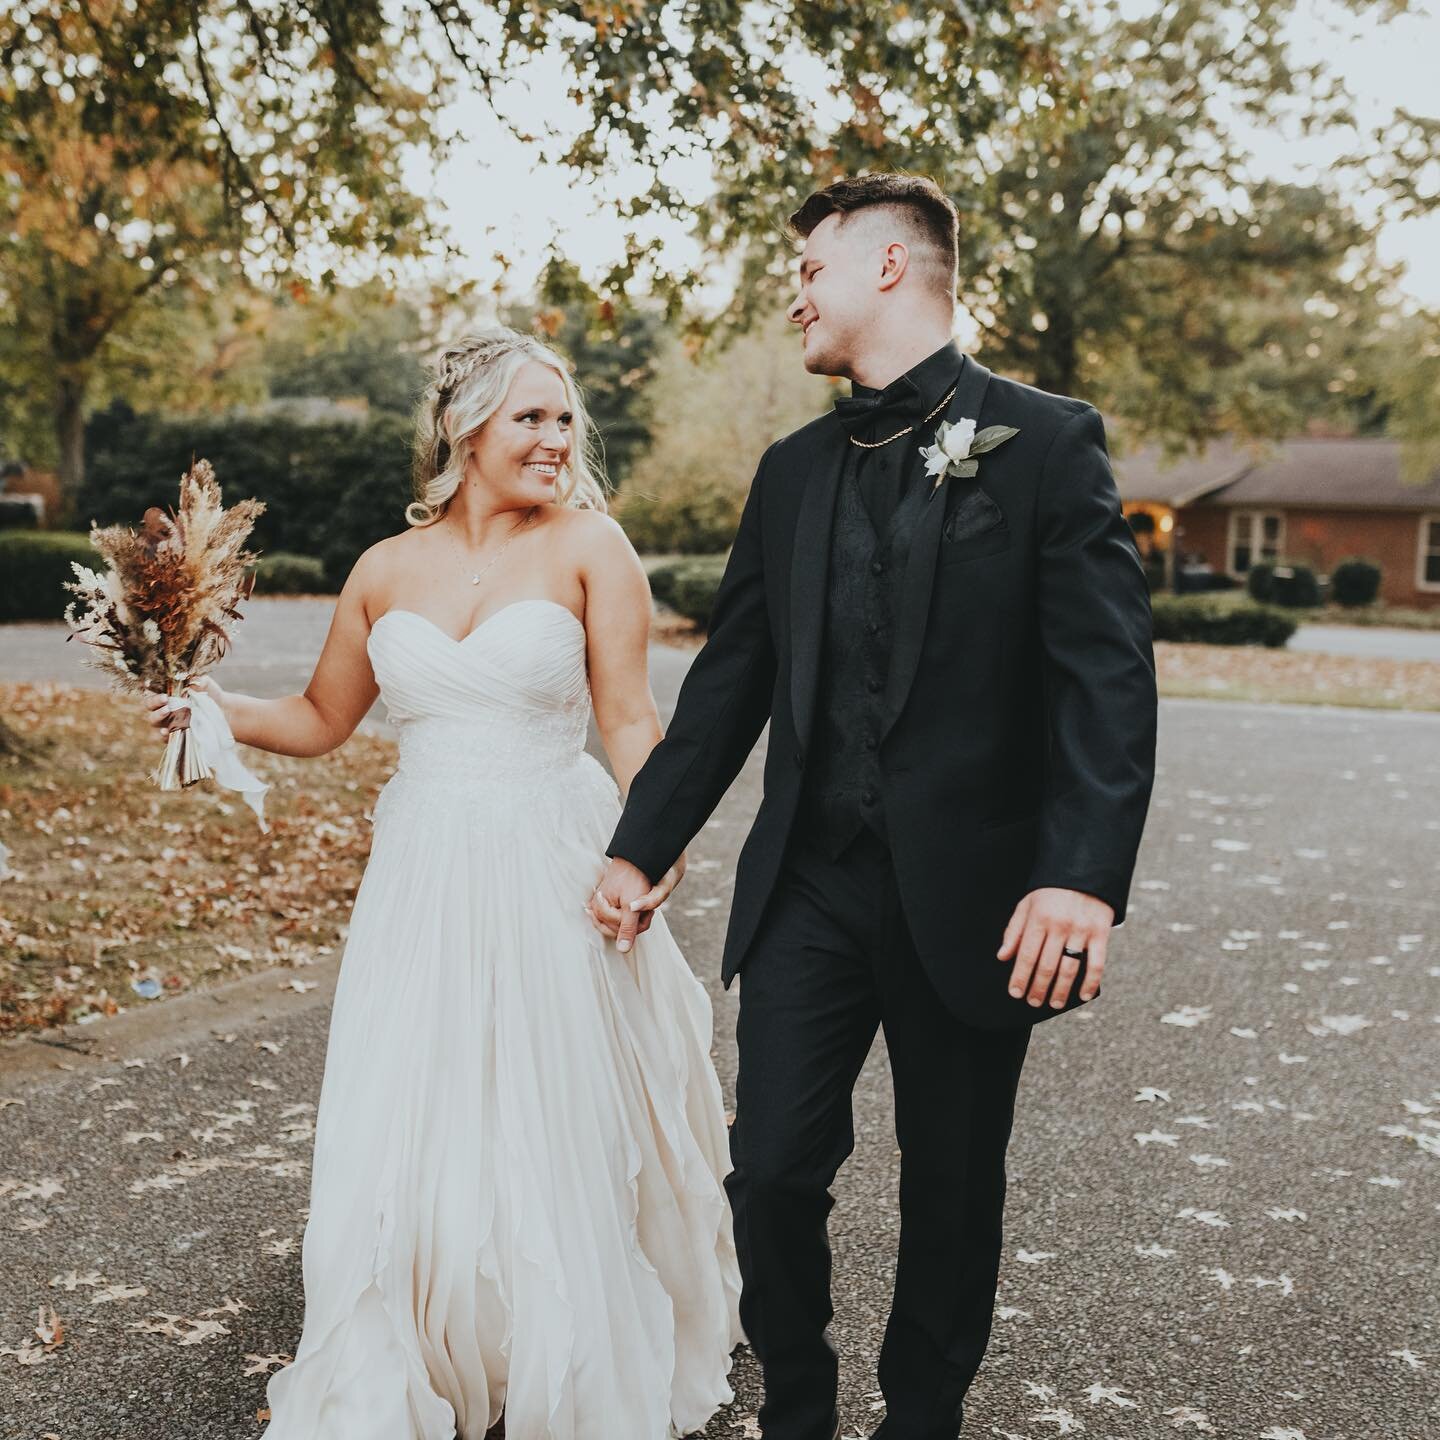 Sneak peek of Hudson &amp; Taylor&rsquo;s beautiful wedding! Congratulations to this amazing couple🤍🎉
#newlywed #justmarried #love